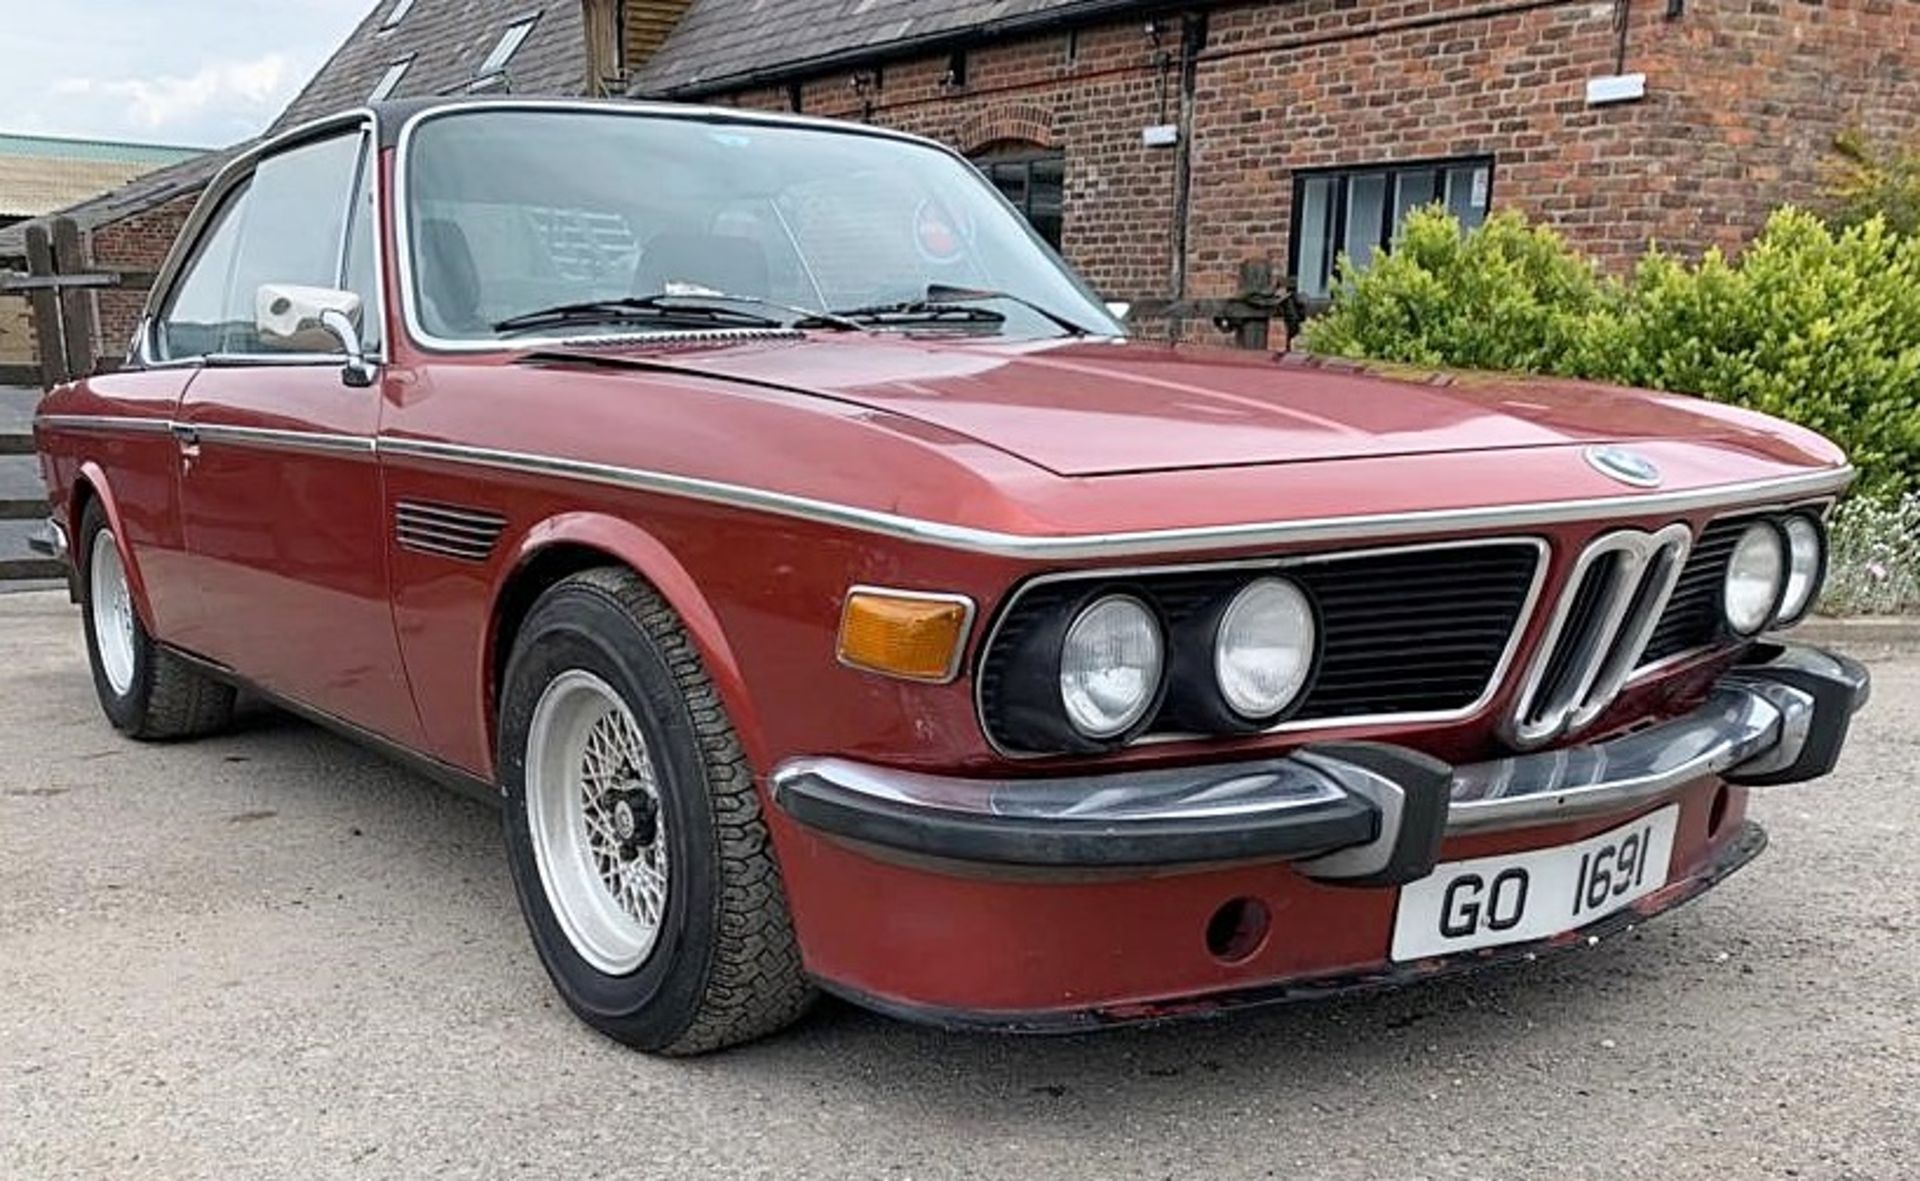 1 x BMW E9 2500 CSA Classic Car - Ultra Rare Example - CL022 - Location: Wilmslow, Cheshire - Image 29 of 29